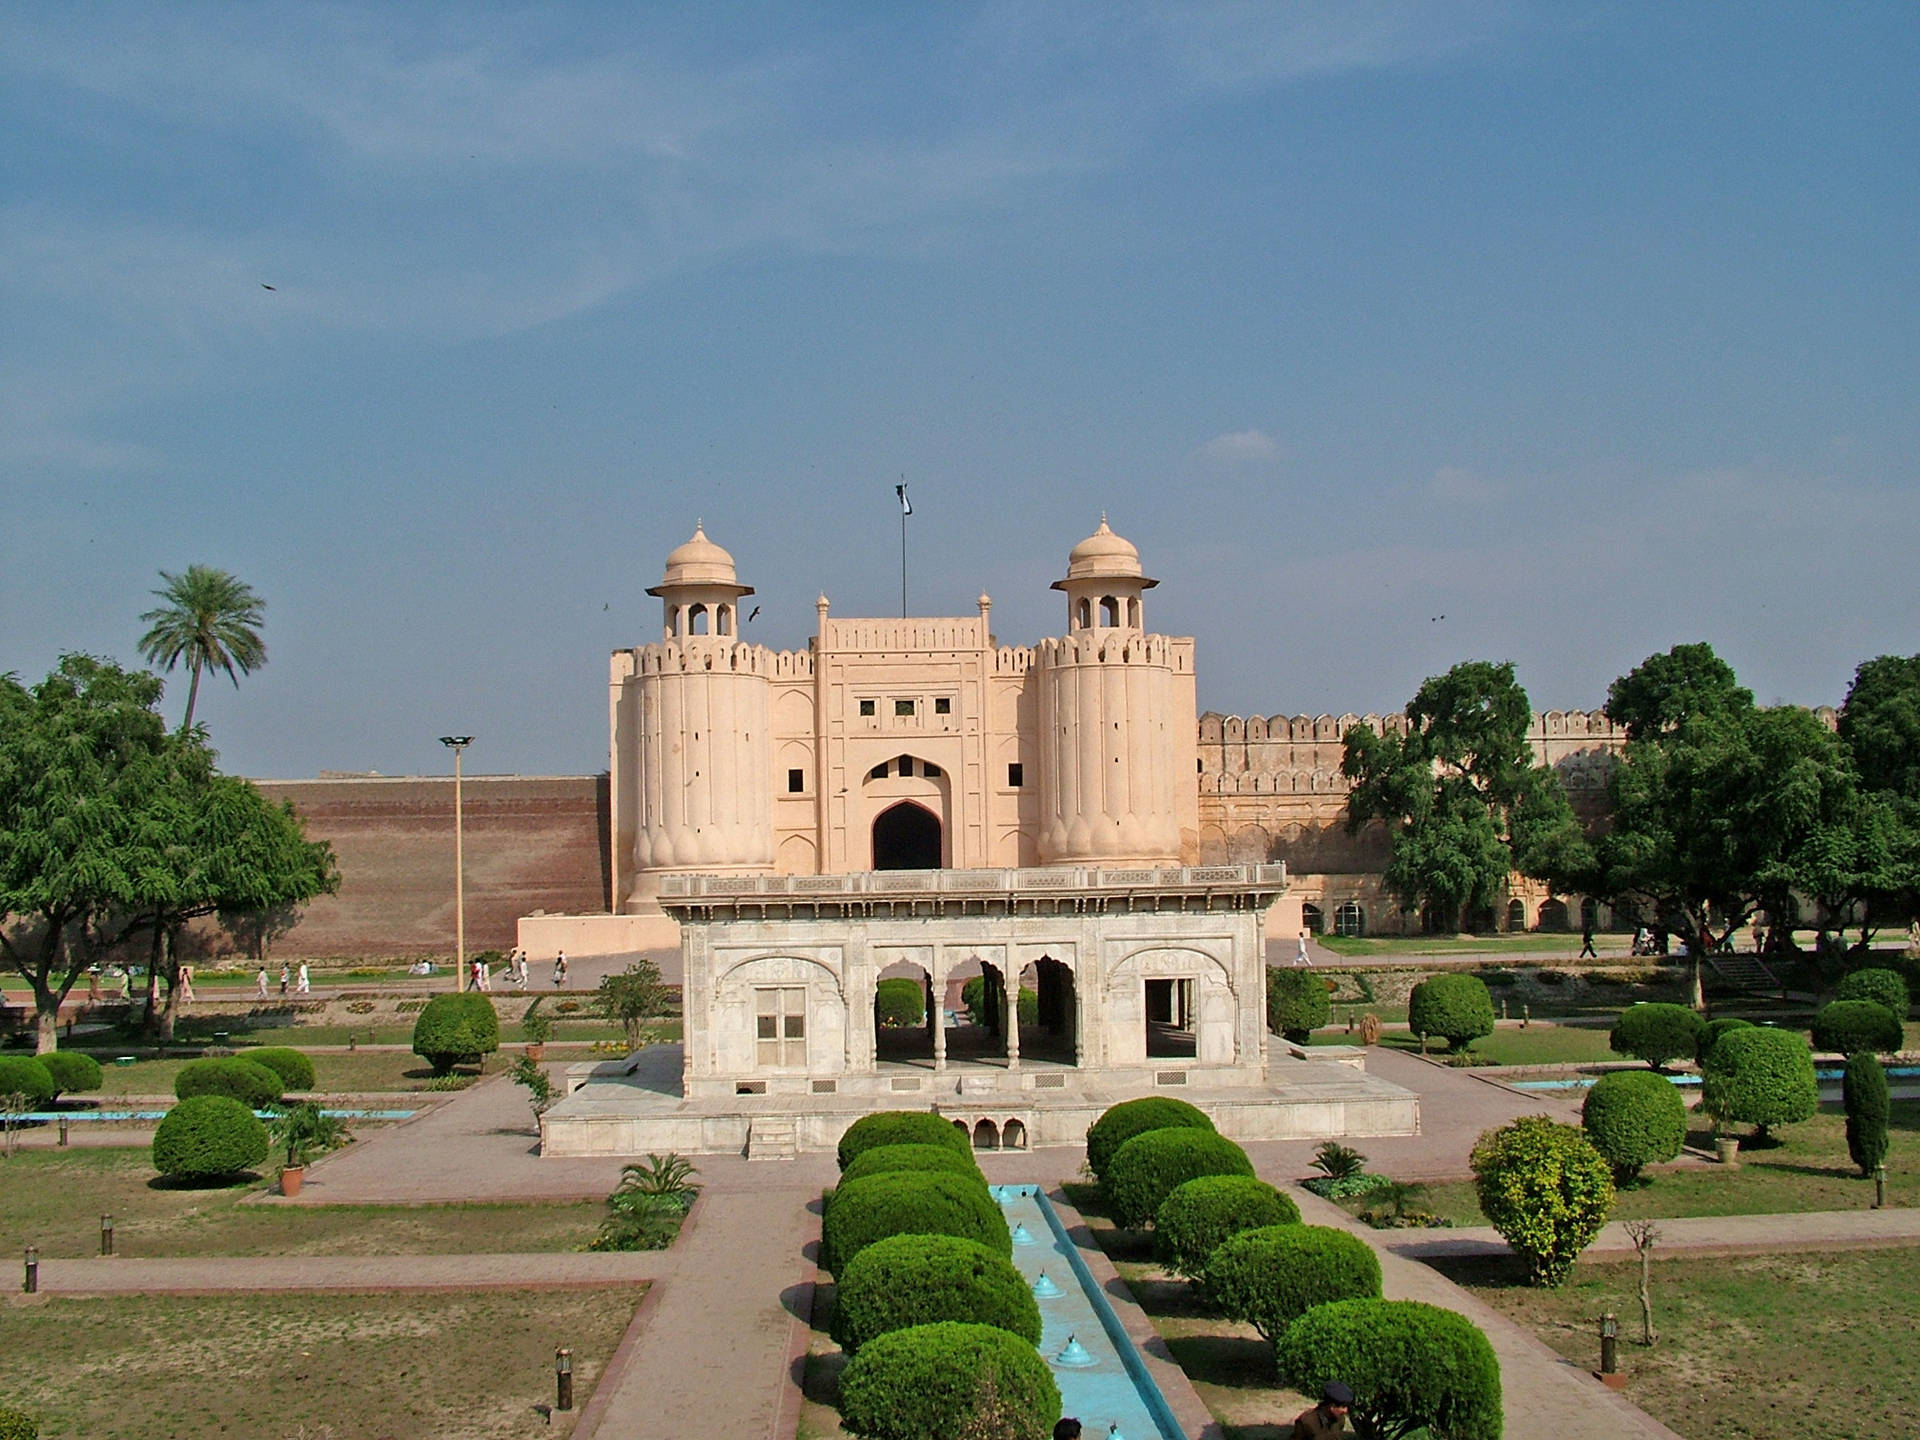 Majestic Lahore Fort with Hazuri Bagh in the foreground. Wallpaper